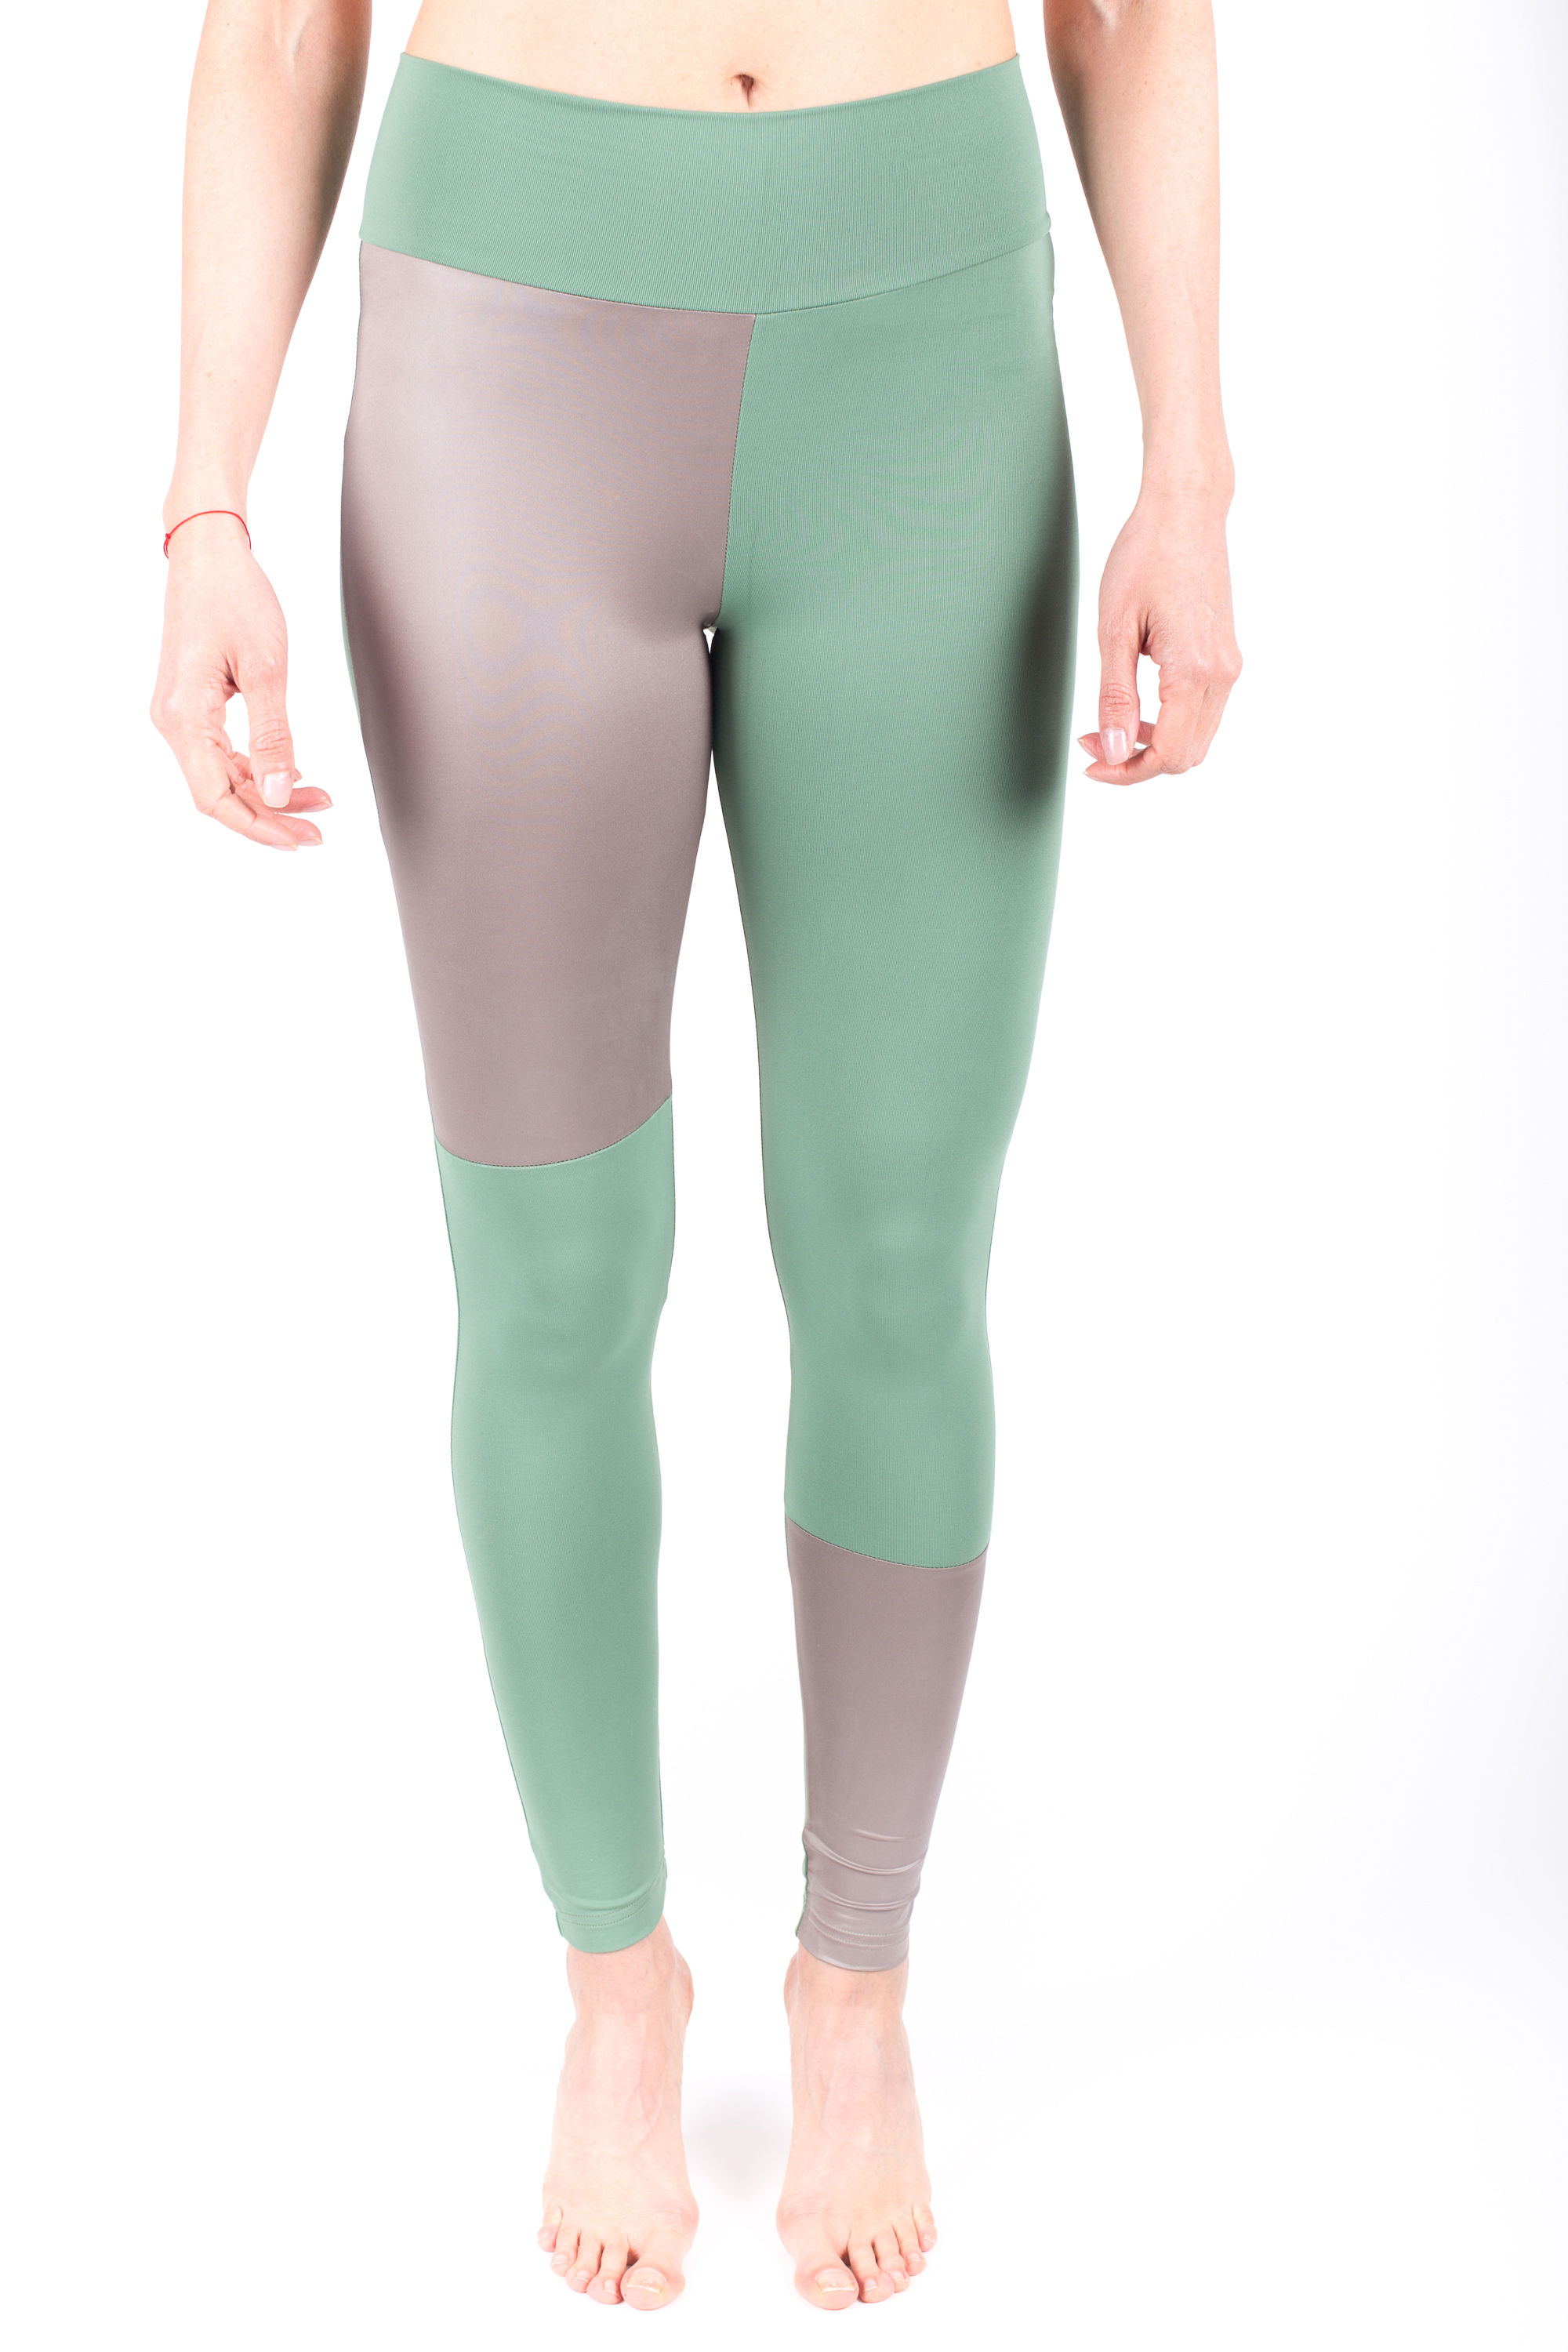 Shiny Green Leggings Wholesale Supplies  International Society of  Precision Agriculture